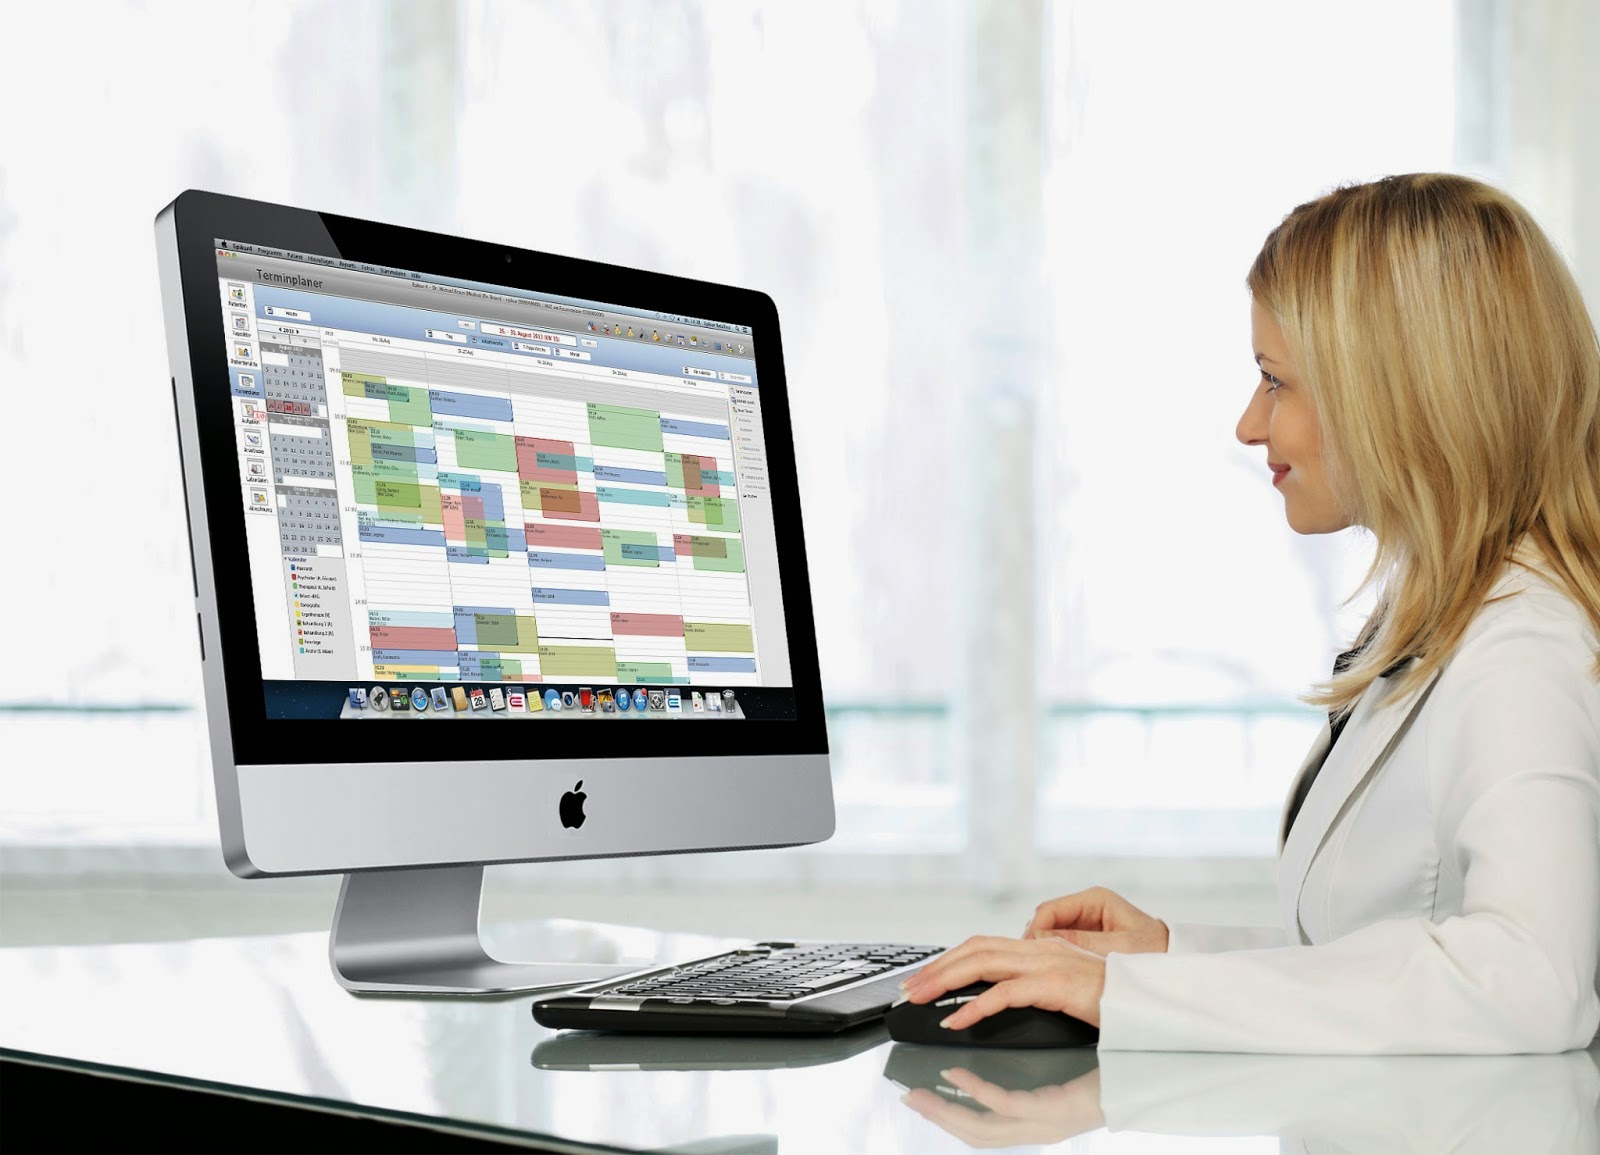 http://sarasolutions.in/hospital-patient-management-software.html